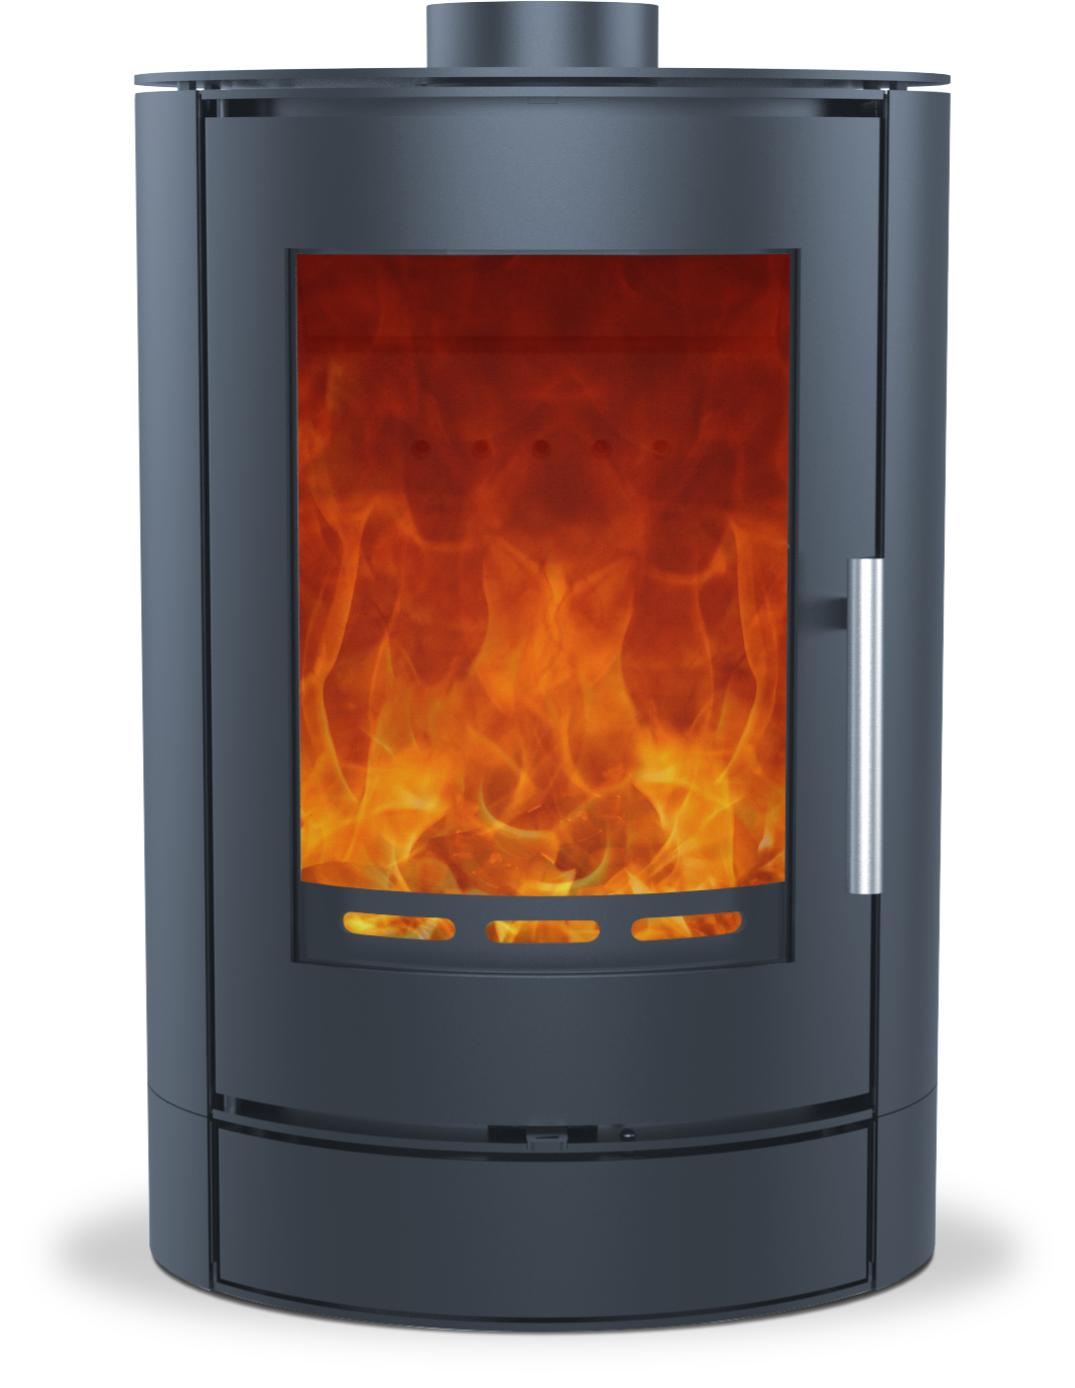 The Charlton Low woodburning stove 5Kw Modern / Contemporary